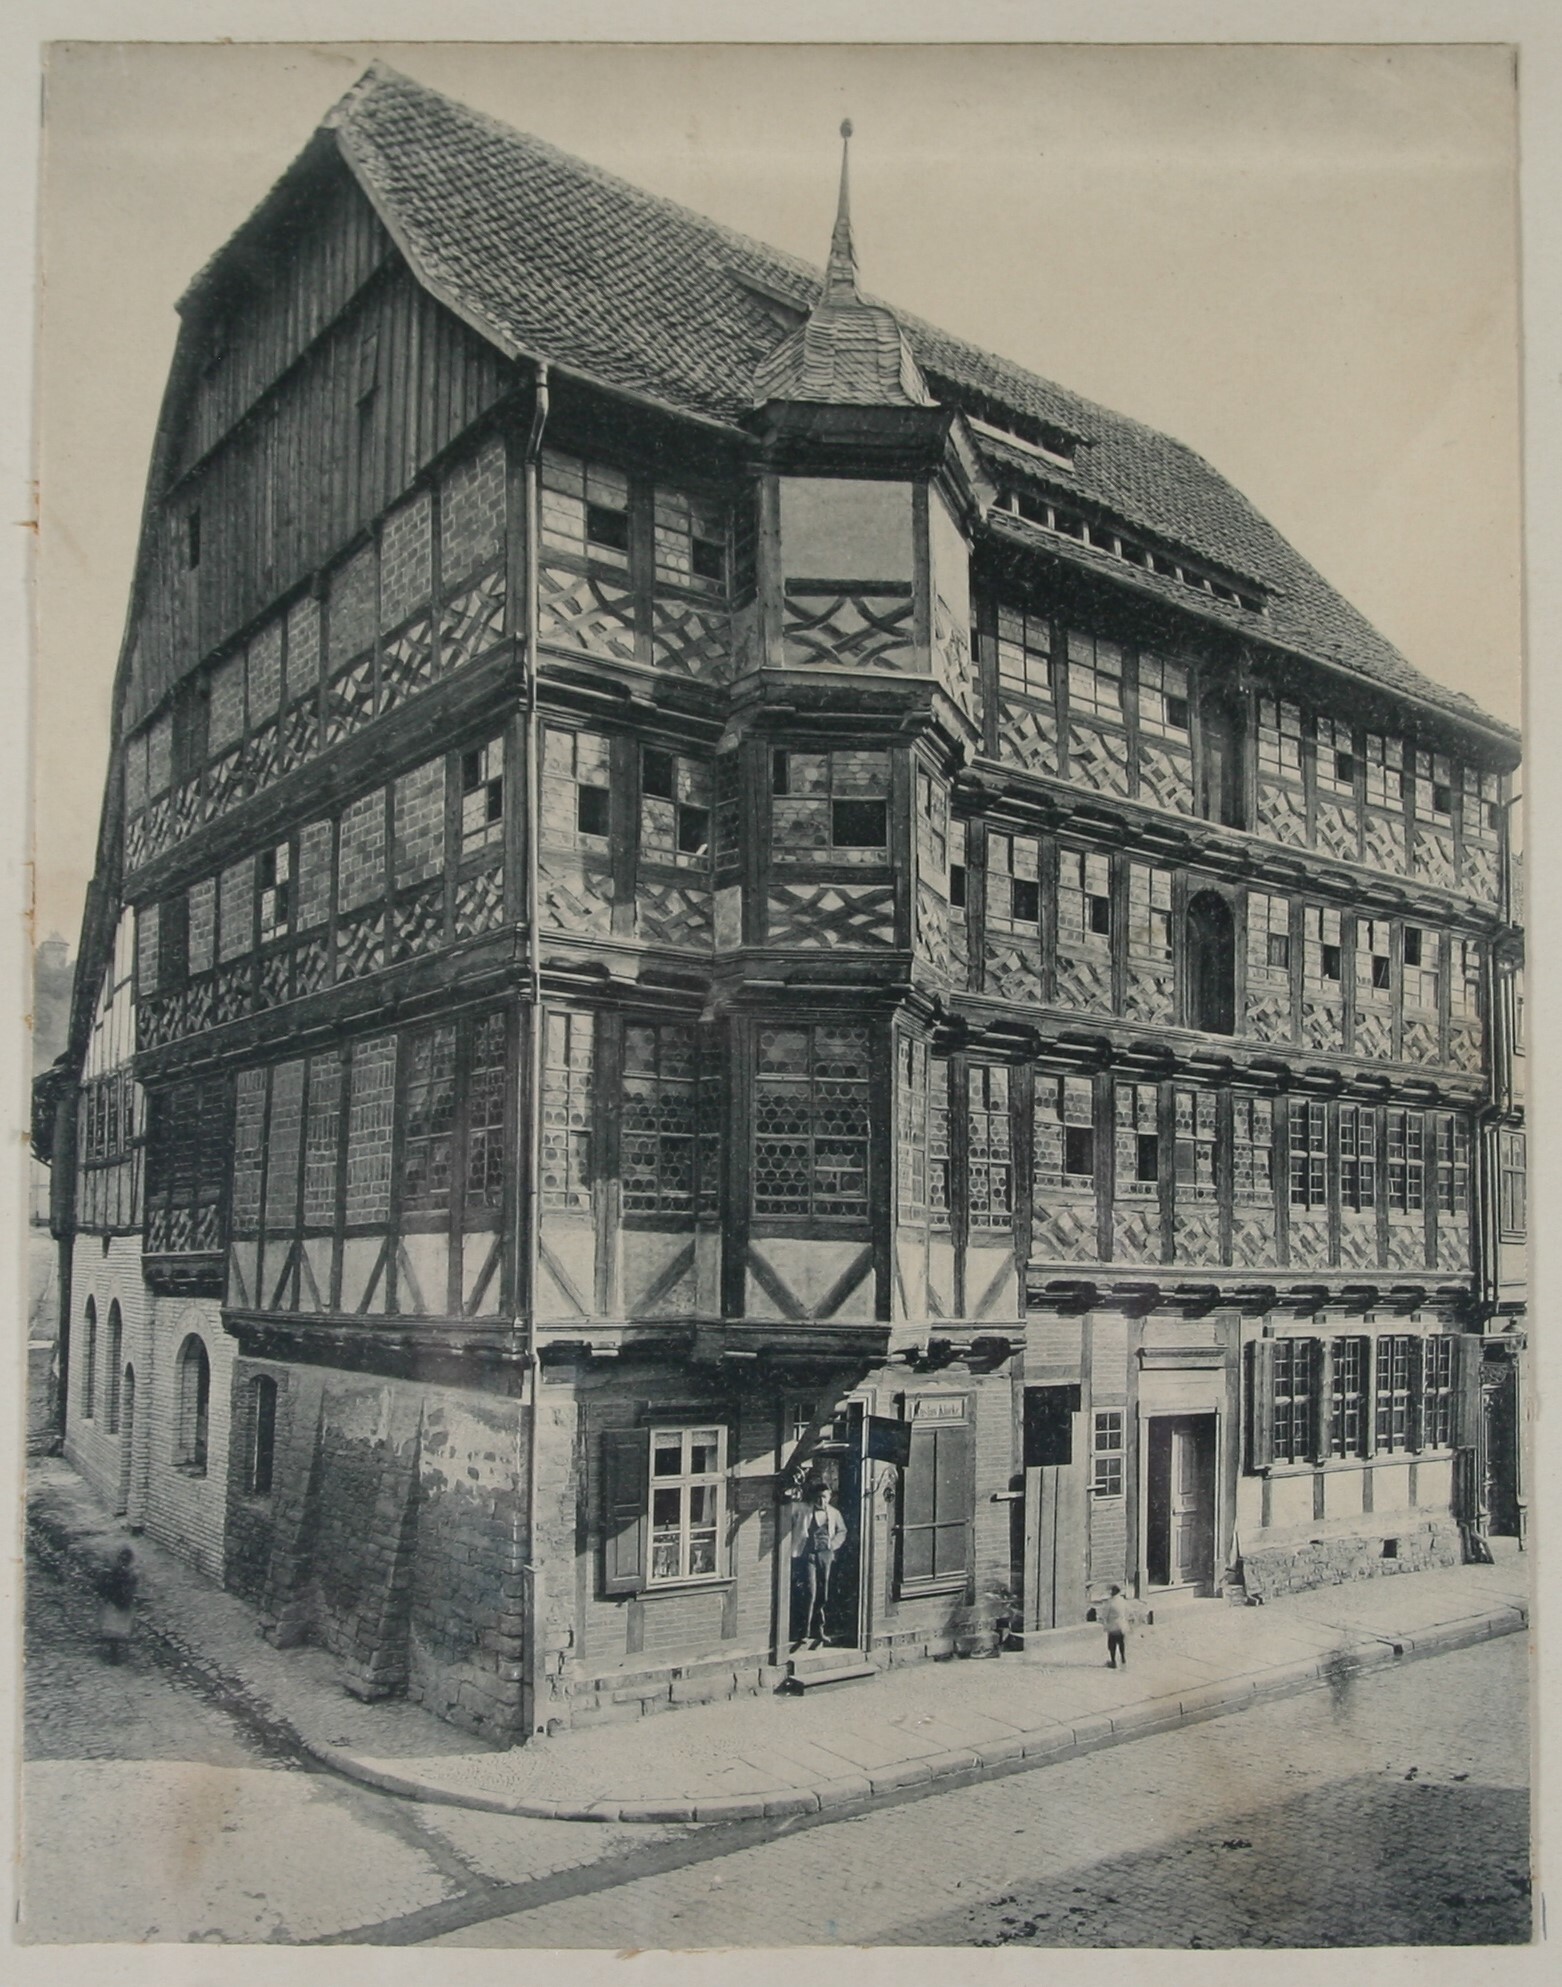 Faulbaumsches Haus (Harzmuseum Wernigerode CC BY-NC-SA)